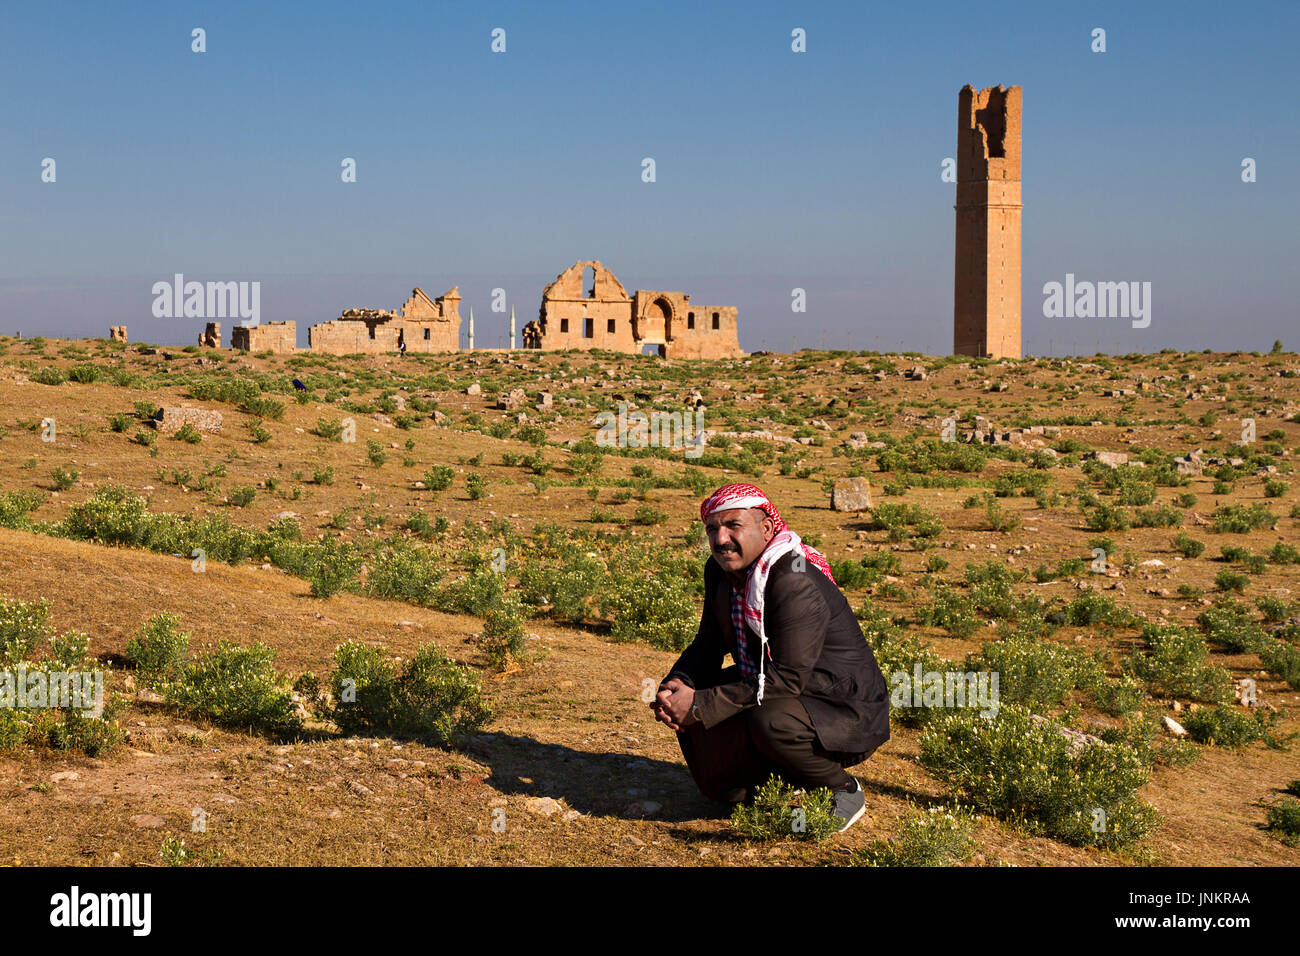 Local man wearing traditional headdress with the ruins of ancient city of Harran in the background, Sanliurfa, Turkey. Stock Photo